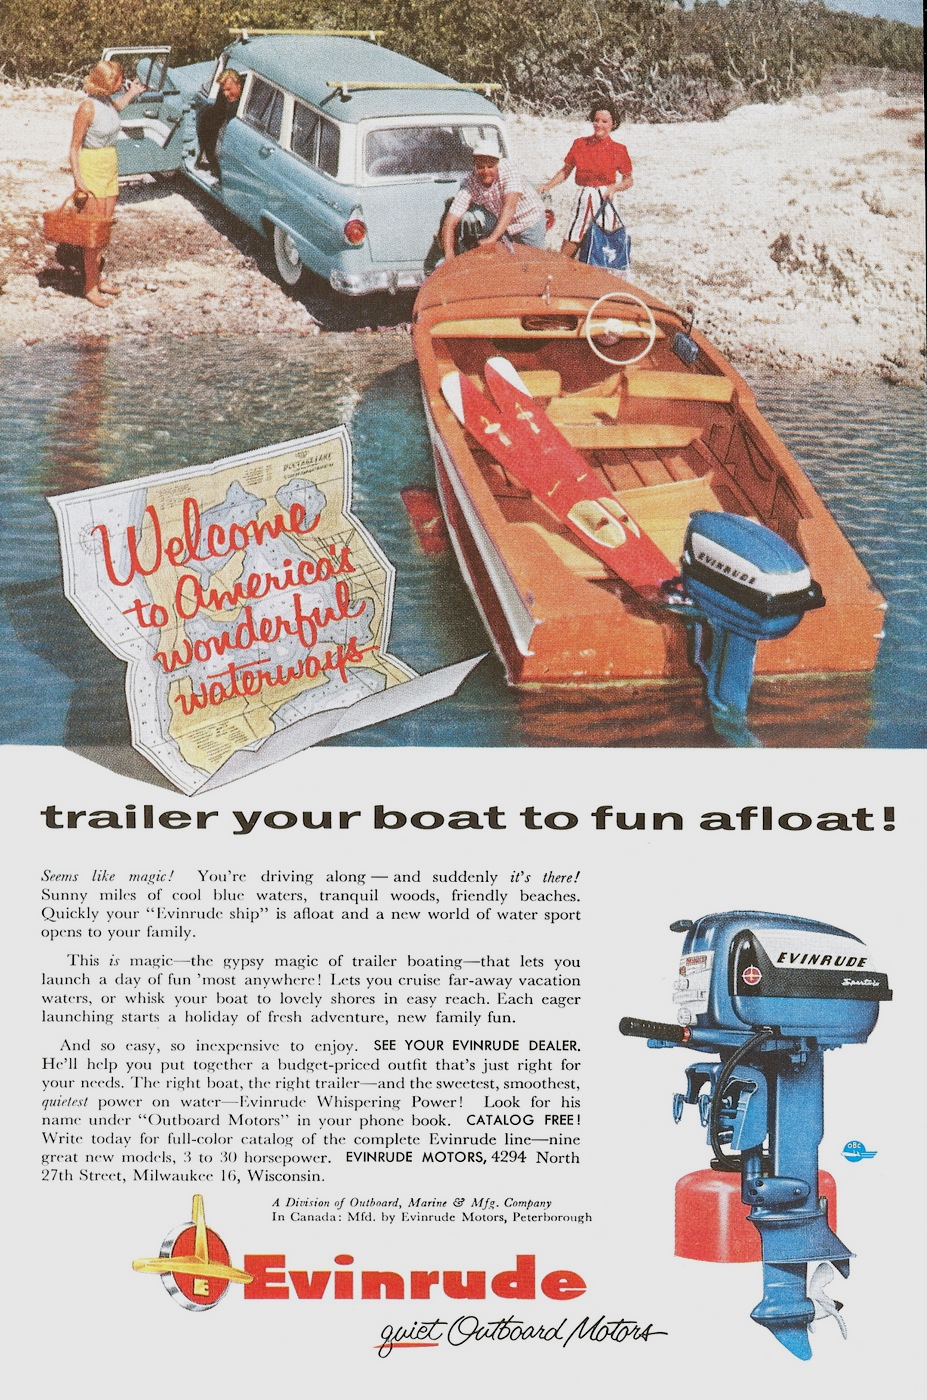 Evinrude outboard motor advertisement.